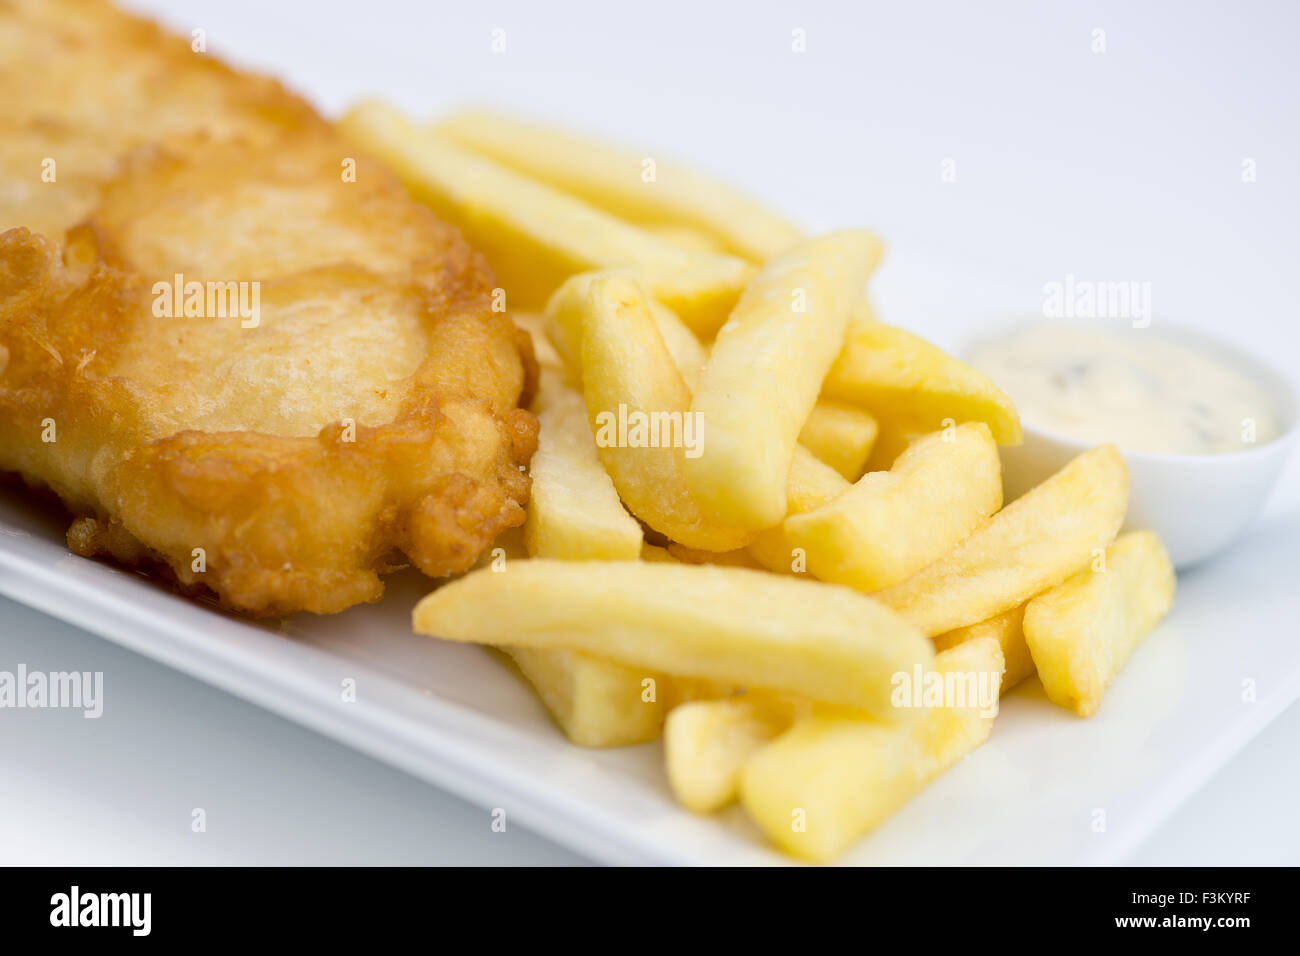 French fries, tartar sauce and breaded fried fish on a white plate against a white background Stock Photo